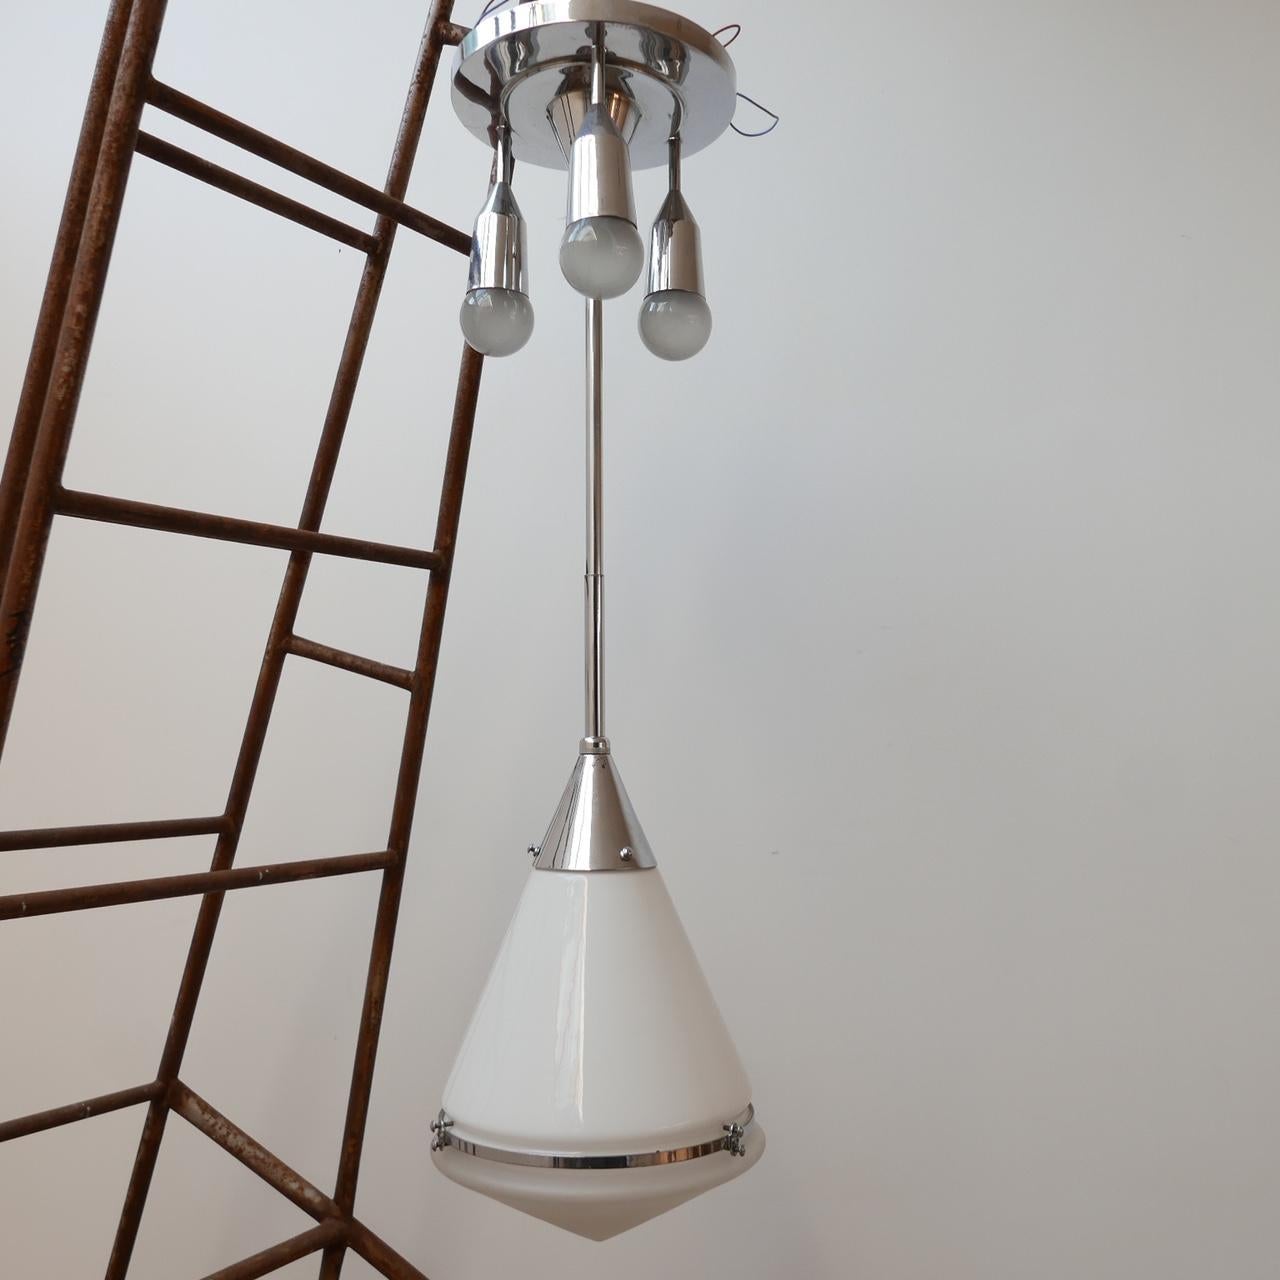 A wildly rare pendant chandelier by Peter Behrens for Siemens and Schuckert,

German, circa 1930s.

Opaline top glass, etched glass base.

Nickel rim and gallery.

The three light gallery is incredibly rare, it is documented in Siemens books